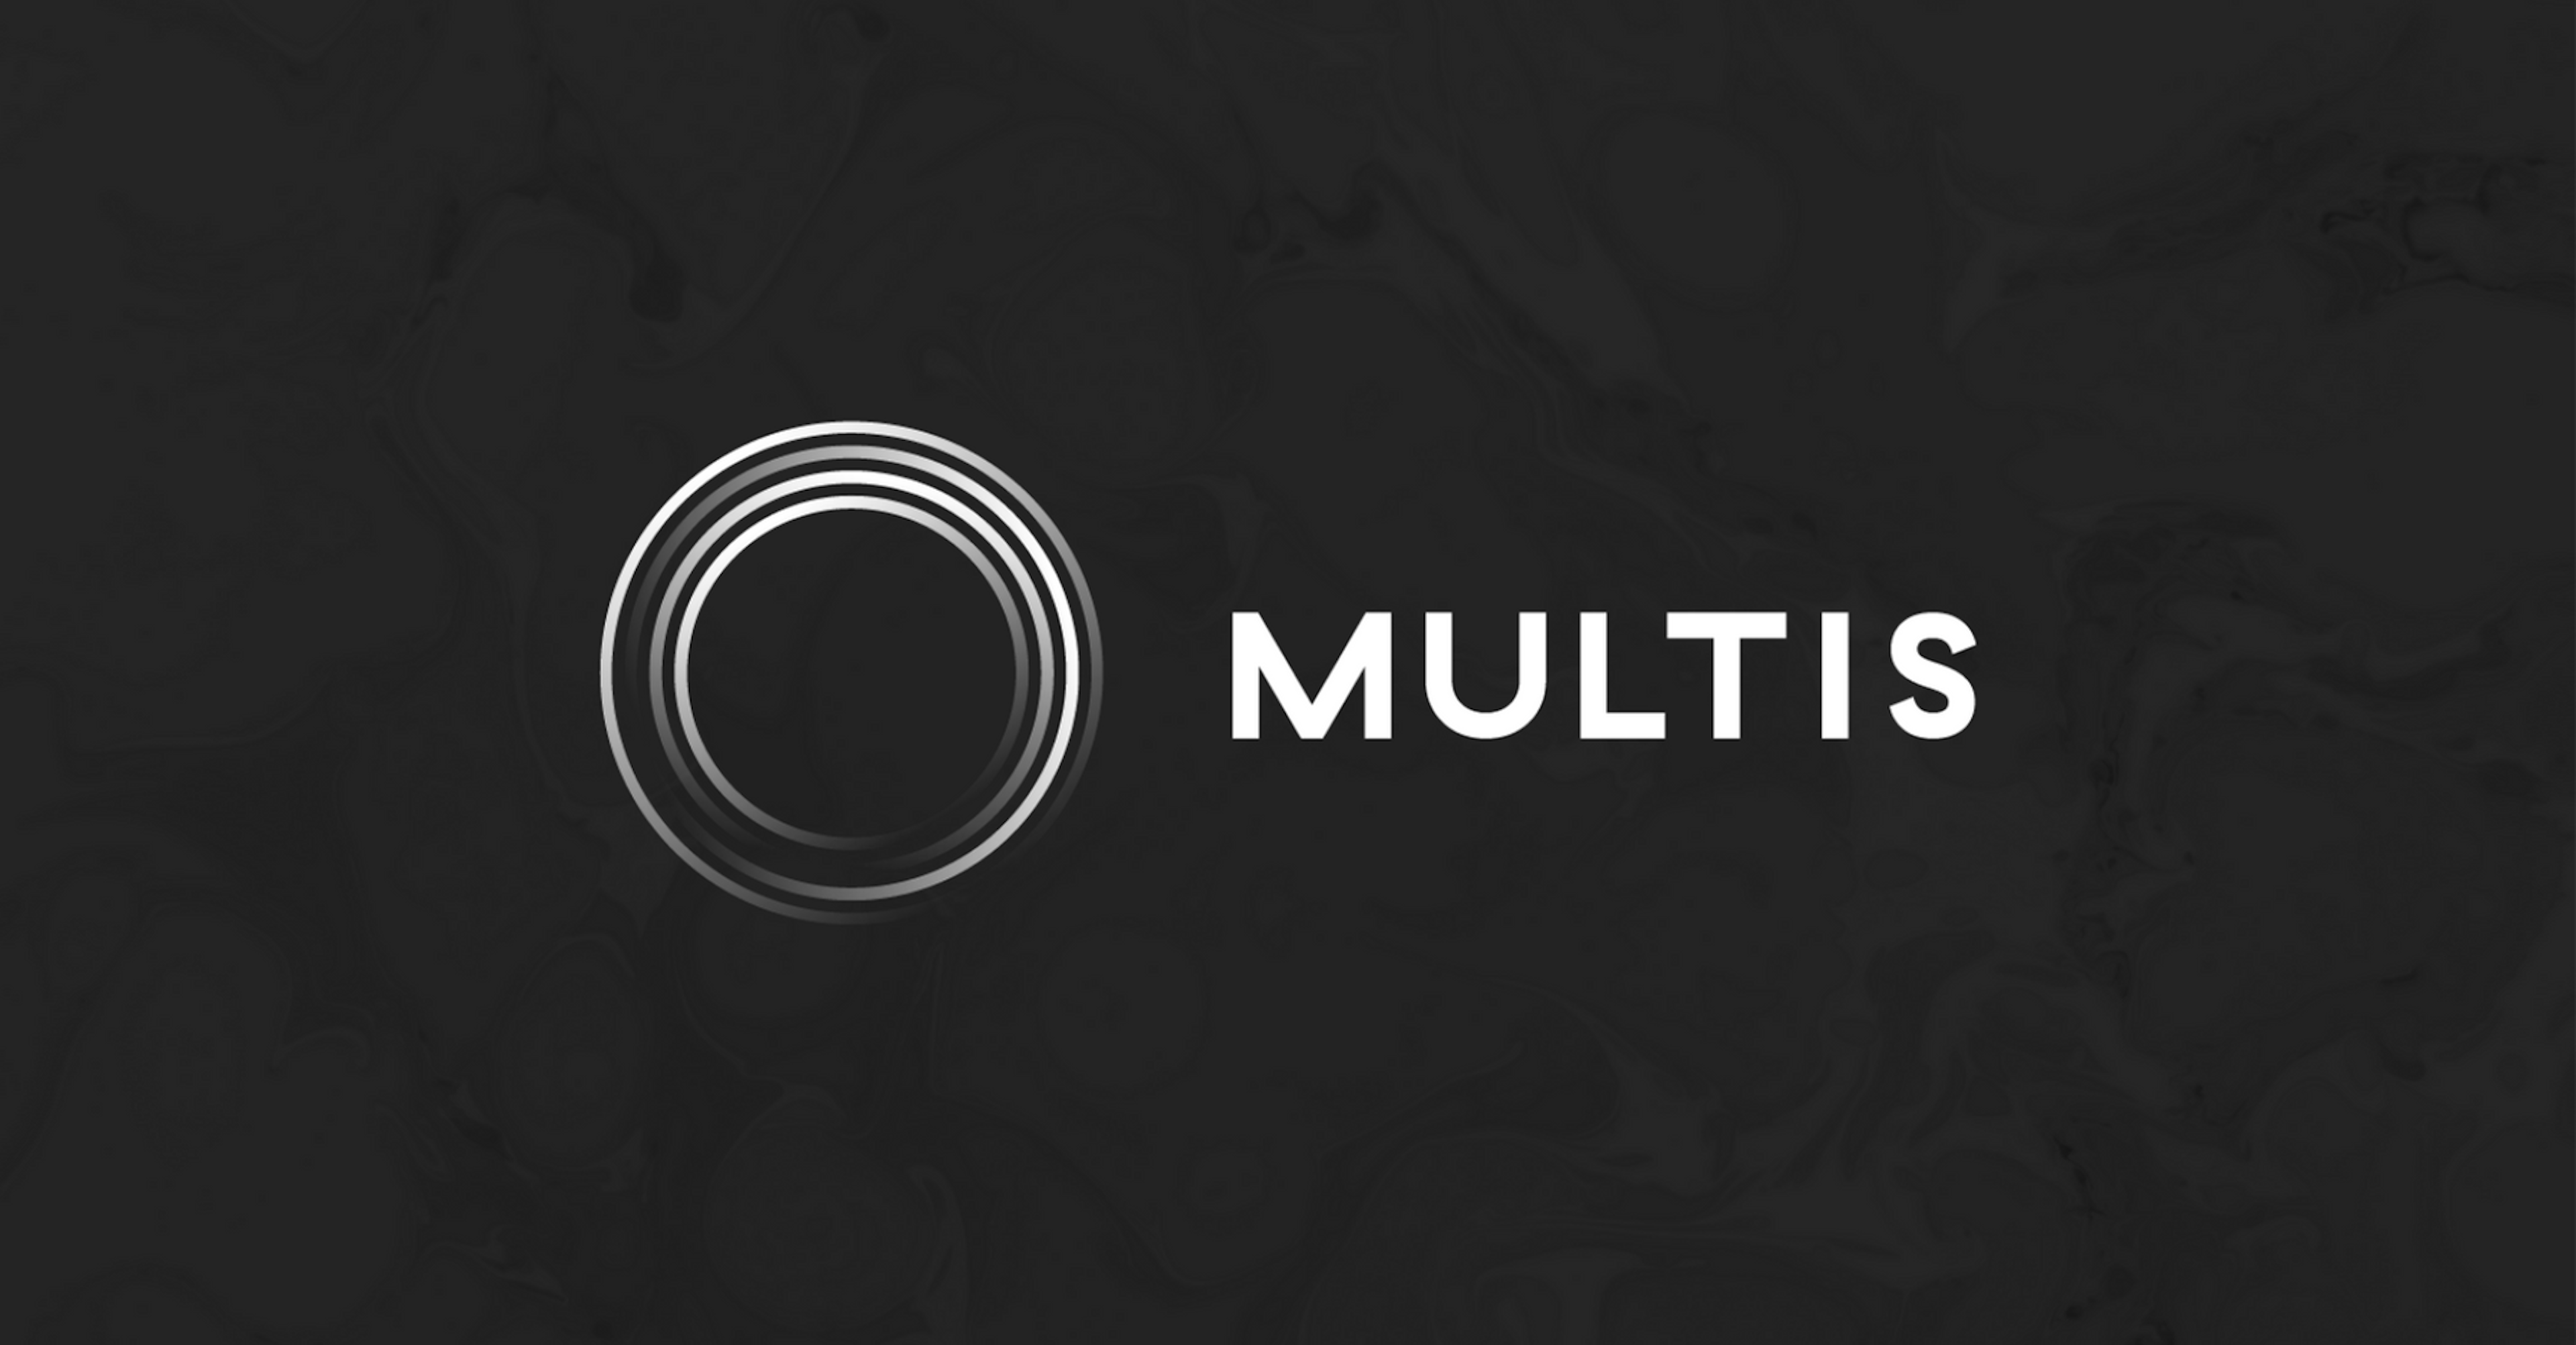 Working at Multis - Use Clojure to Build the Best Crypto Wallet